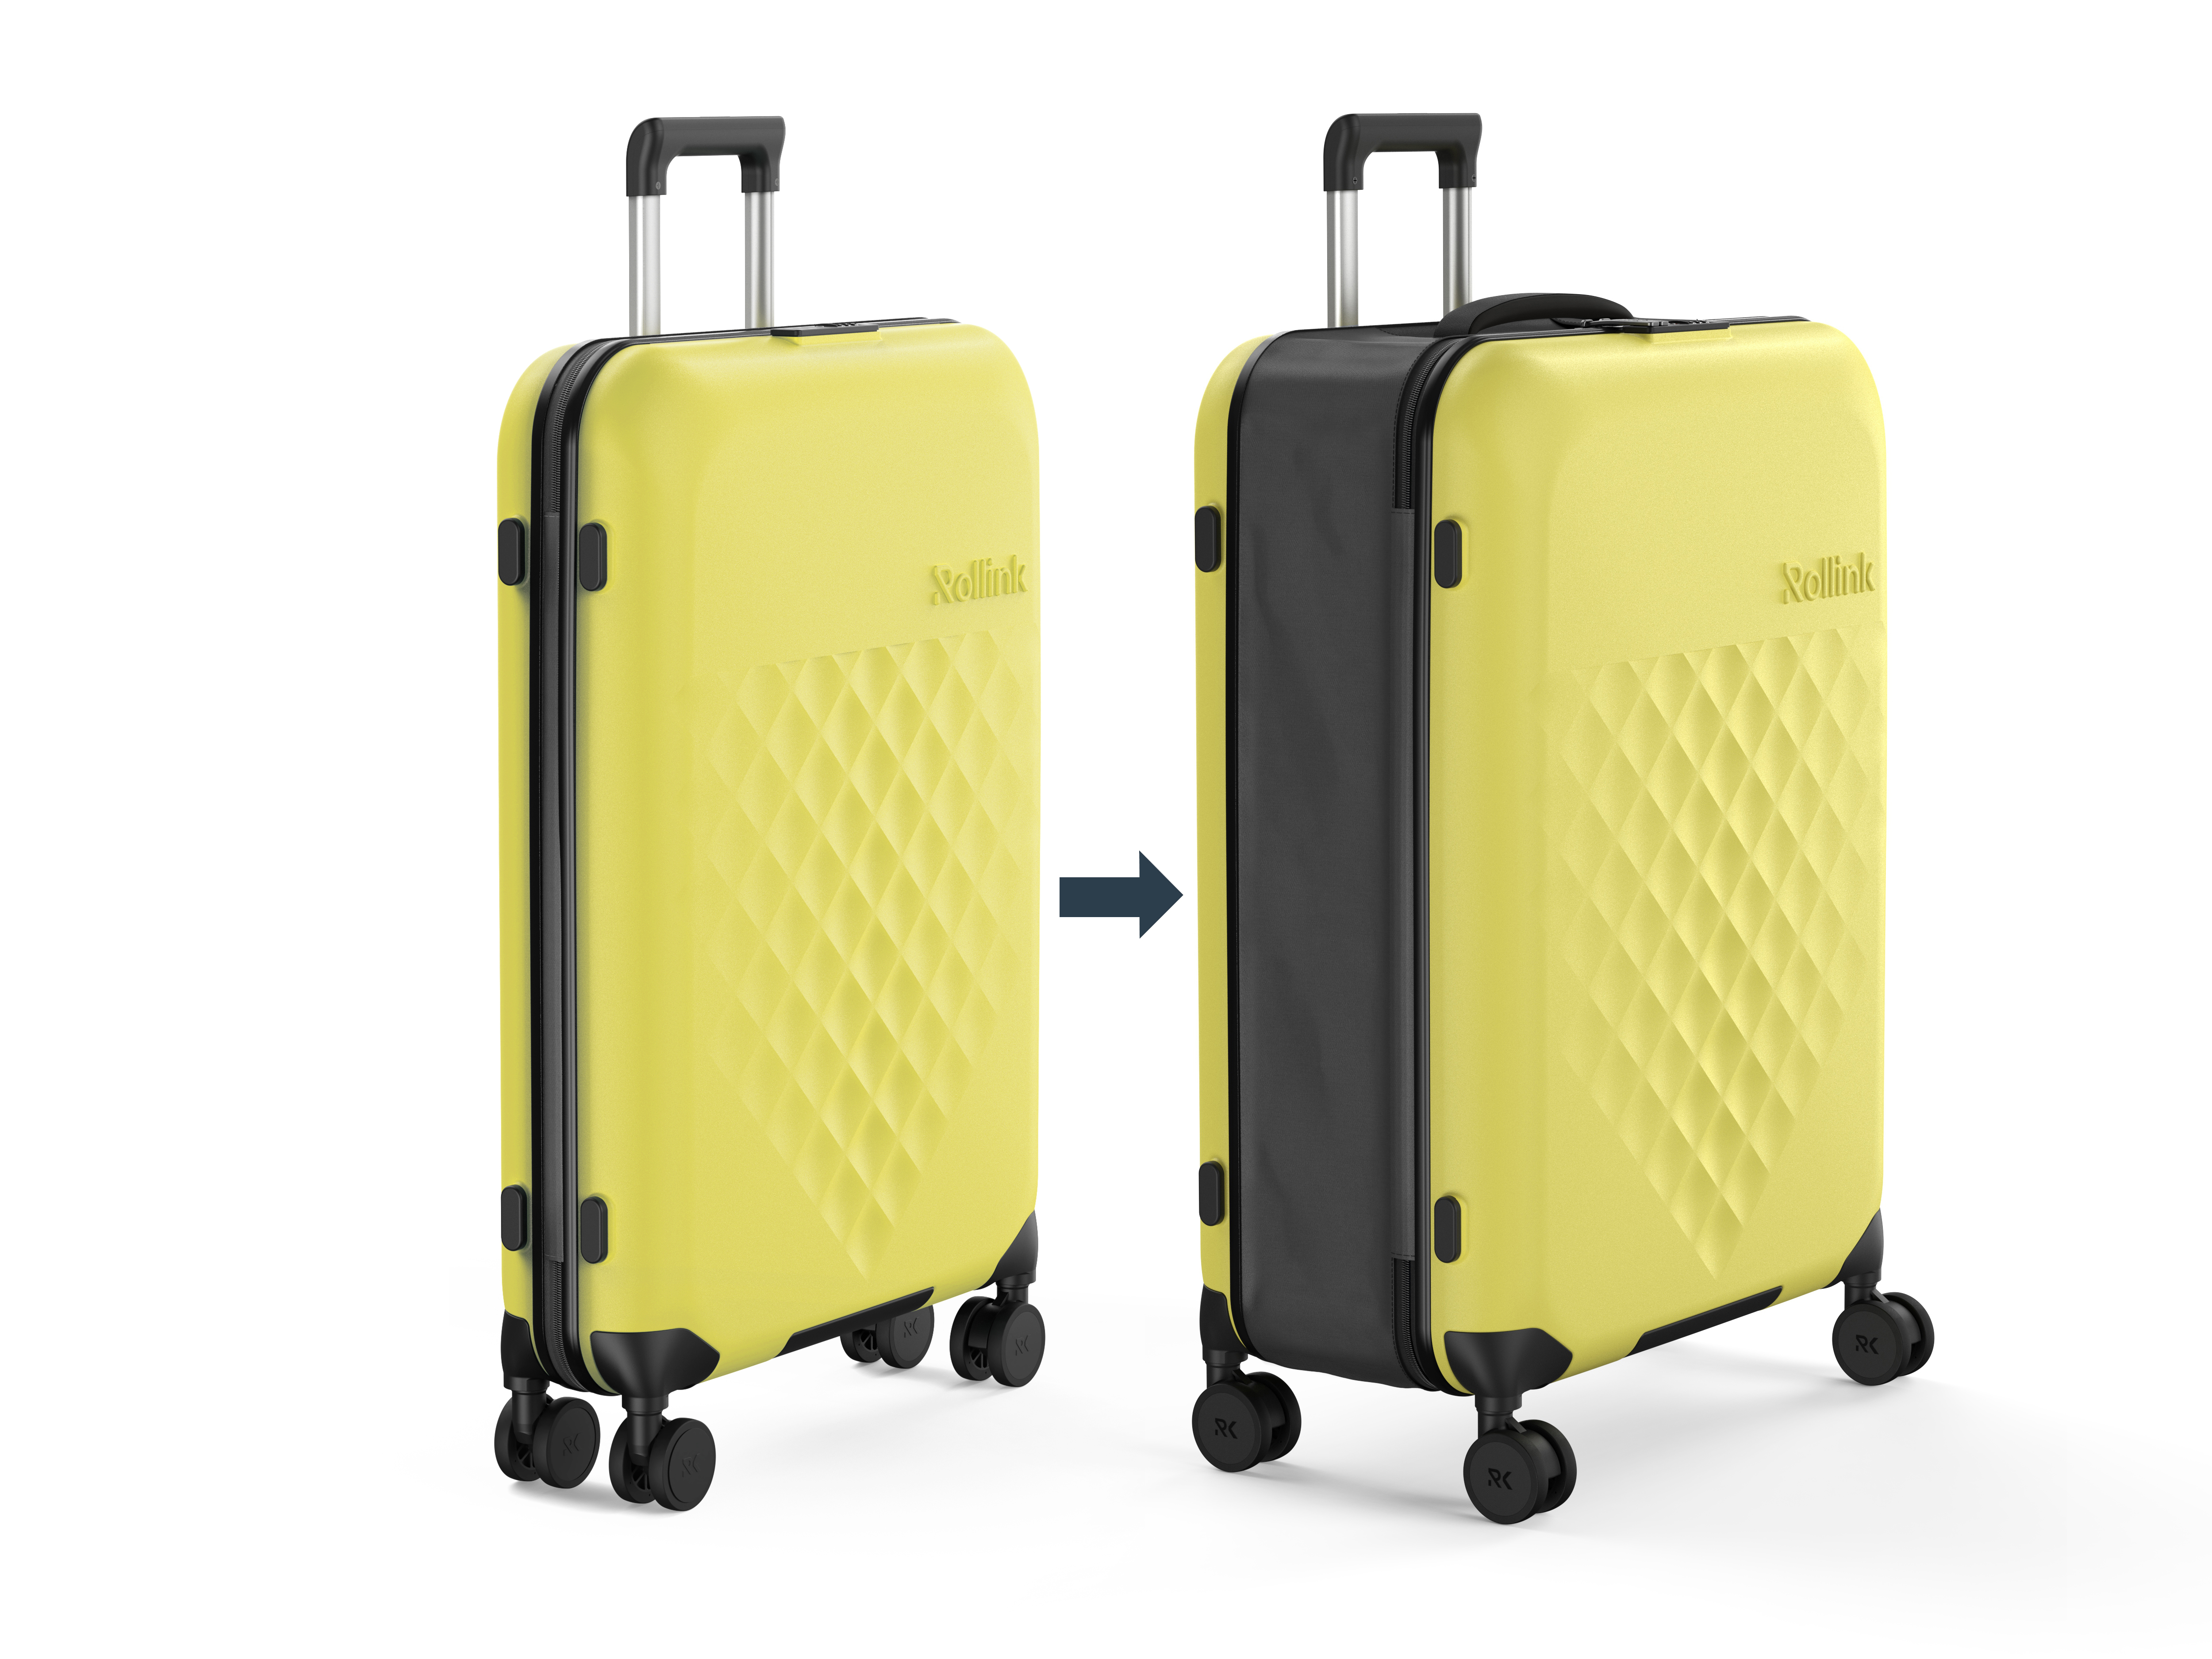 Rollink Flex 360° Spinner Collapsible 4-Wheel 29 inch Checked Luggage, Yellow Iris